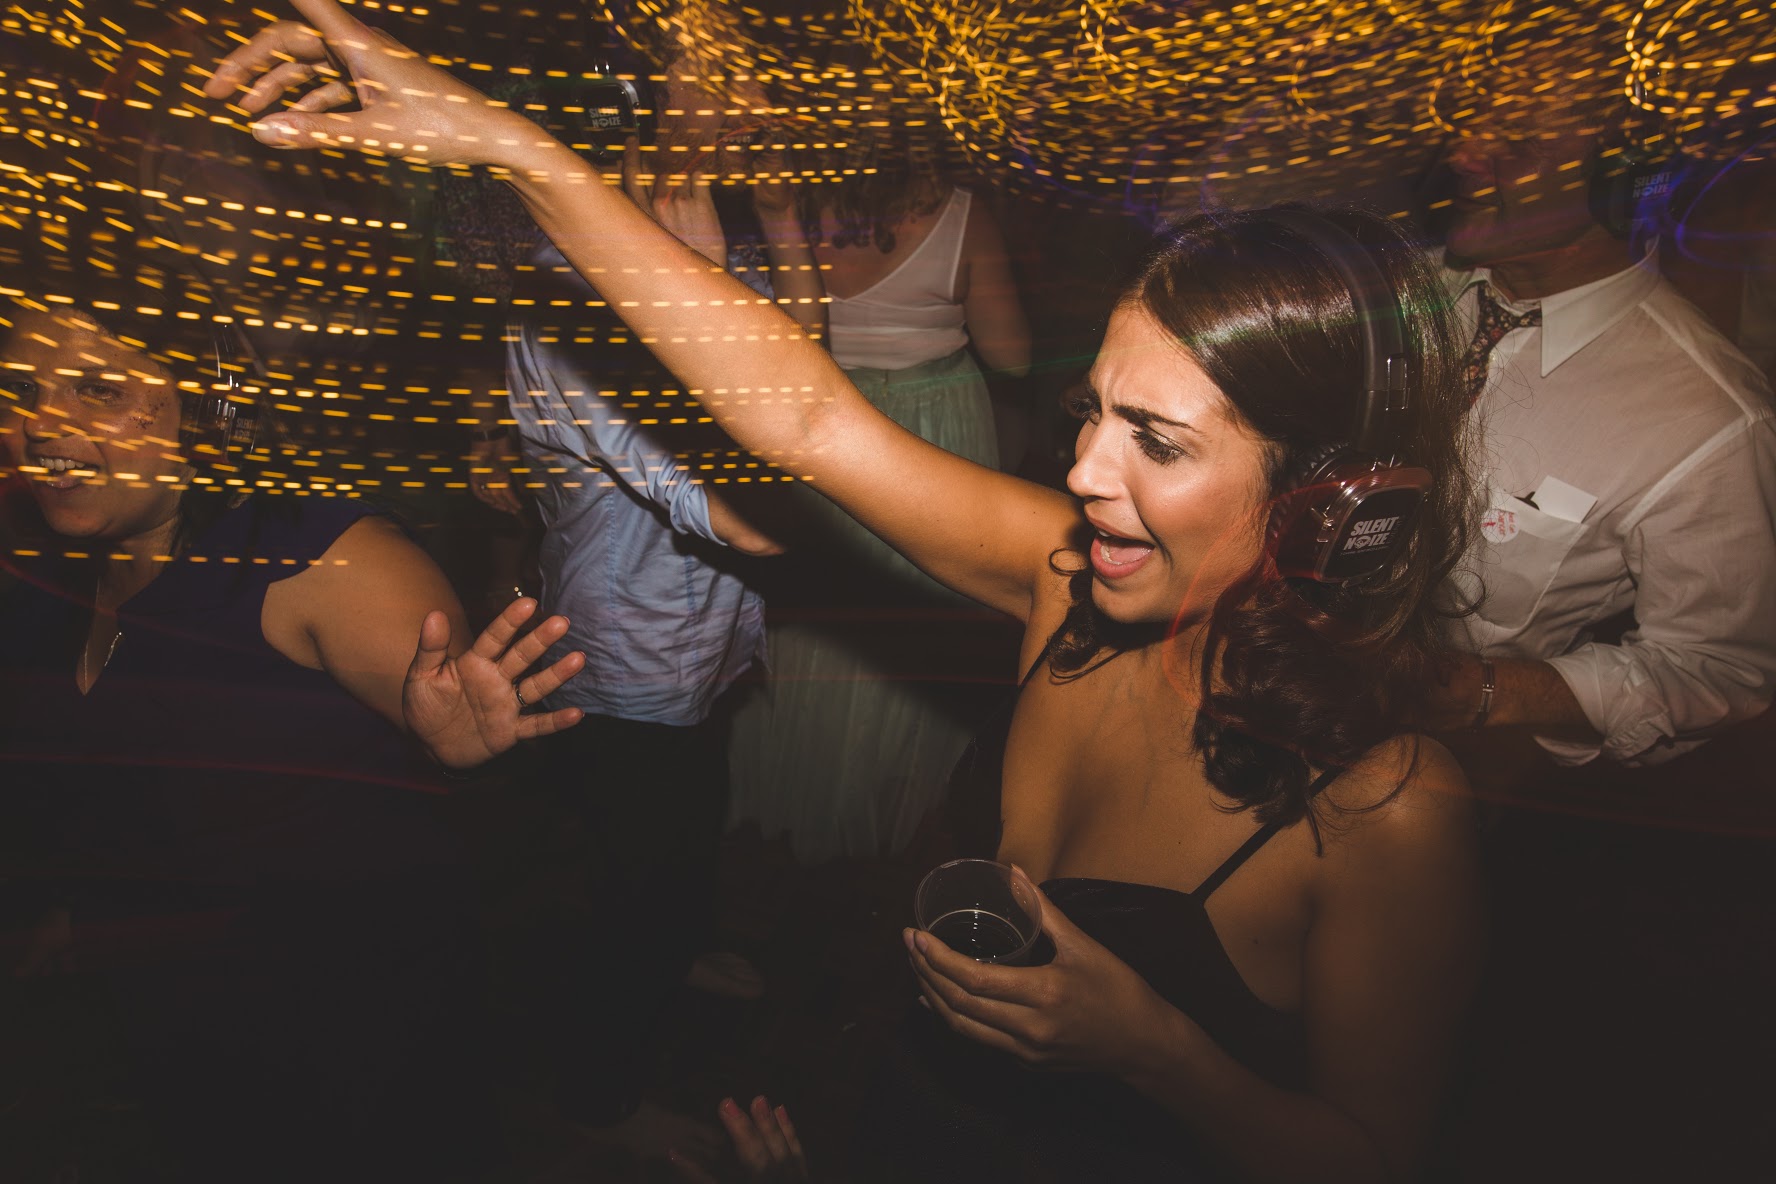 A girl partying at a silent disco party